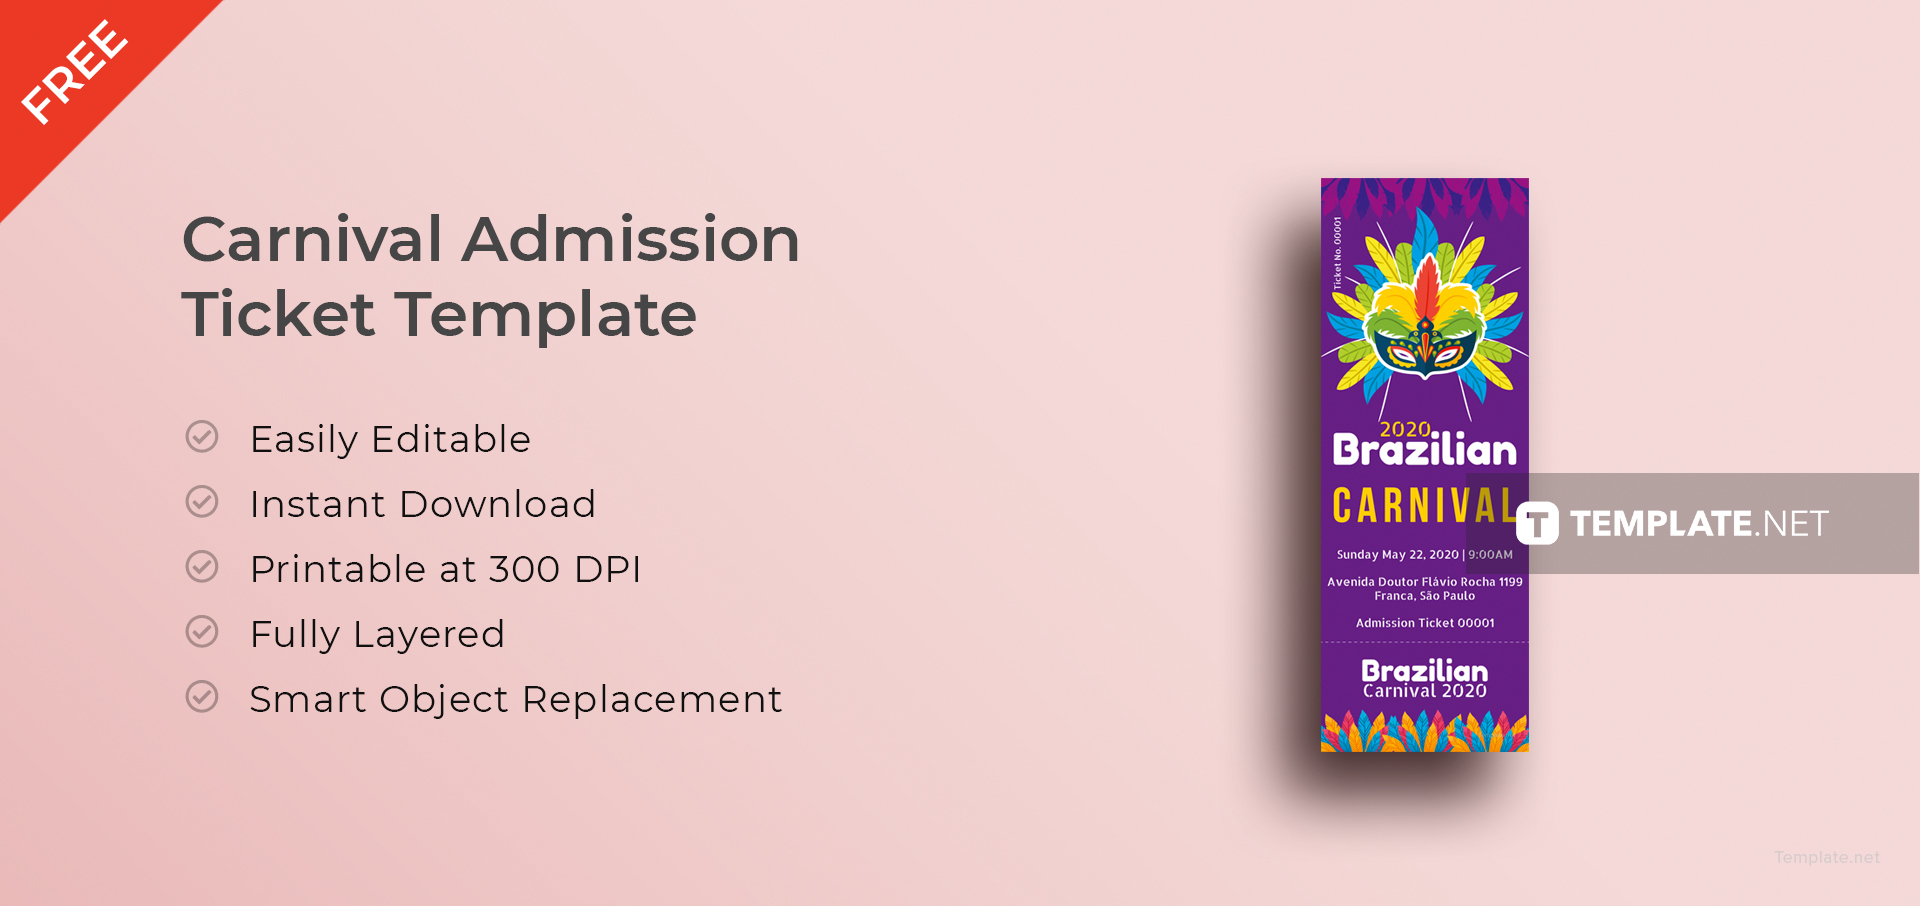 free-carnival-admission-ticket-template-in-adobe-photoshop-microsoft-word-microsoft-publisher